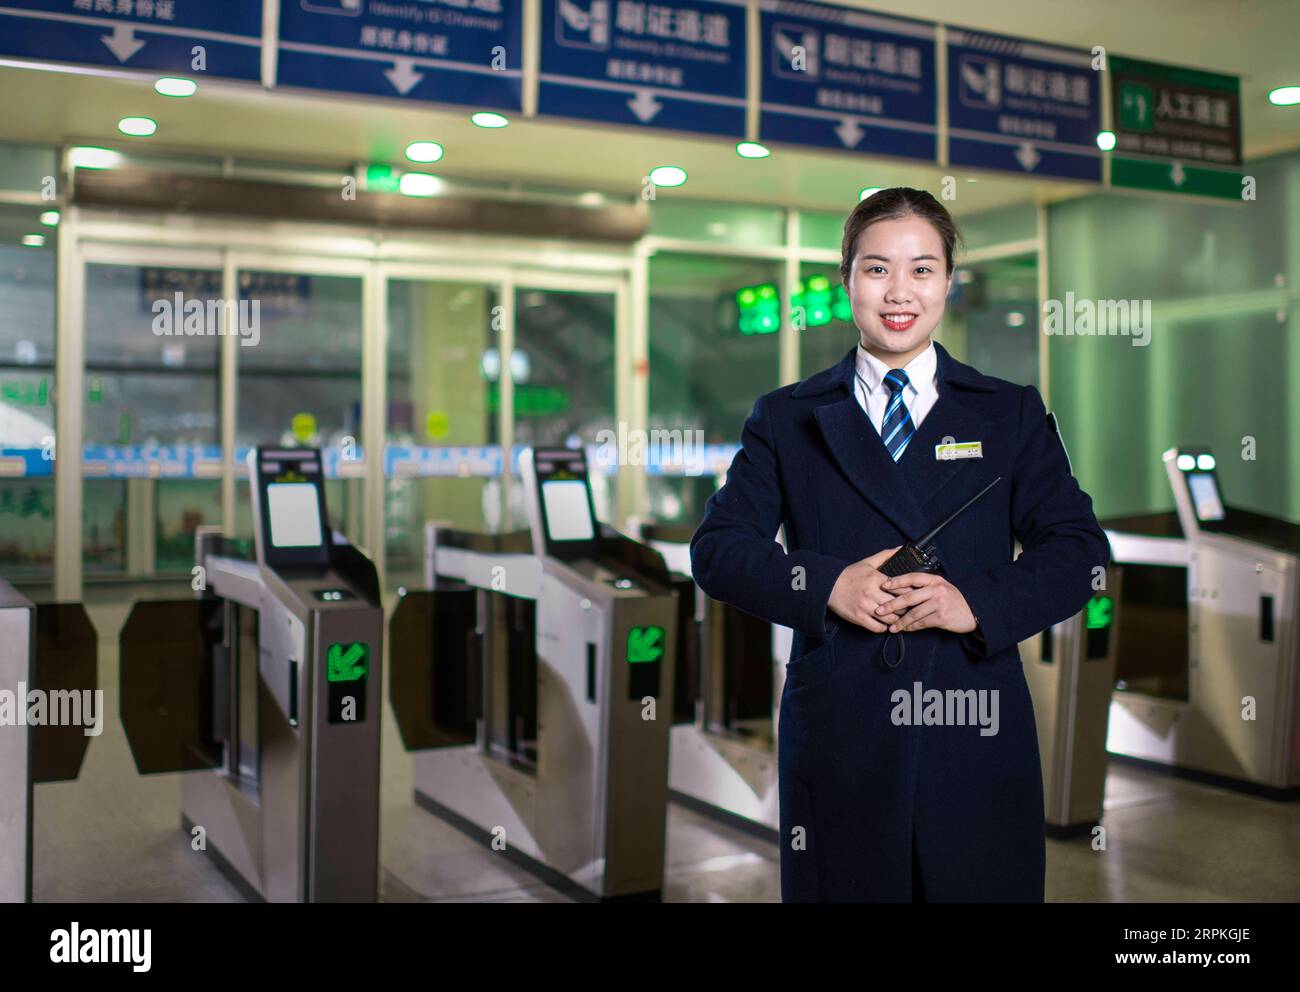 200111 -- WUHAN, Jan. 11, 2020 -- Sun Fanjun, a ticket inspector, poses for a photo at Hankou Railway Station in Wuhan, central China s Hubei Province, Jan. 5, 2020. China, the world s most populated country, on Jan. 10 ushered in its largest annual migration, 15 days ahead of the Spring Festival, or the Lunar New Year. This year, three billion trips will be made during the travel rush from Jan. 10 to Feb. 18 for family reunions and travel, according to official forecast. The 40-day travel rush is known as Chunyun in Chinese. The Lunar New Year falls on Jan. 25 this year, earlier than previous Stock Photo